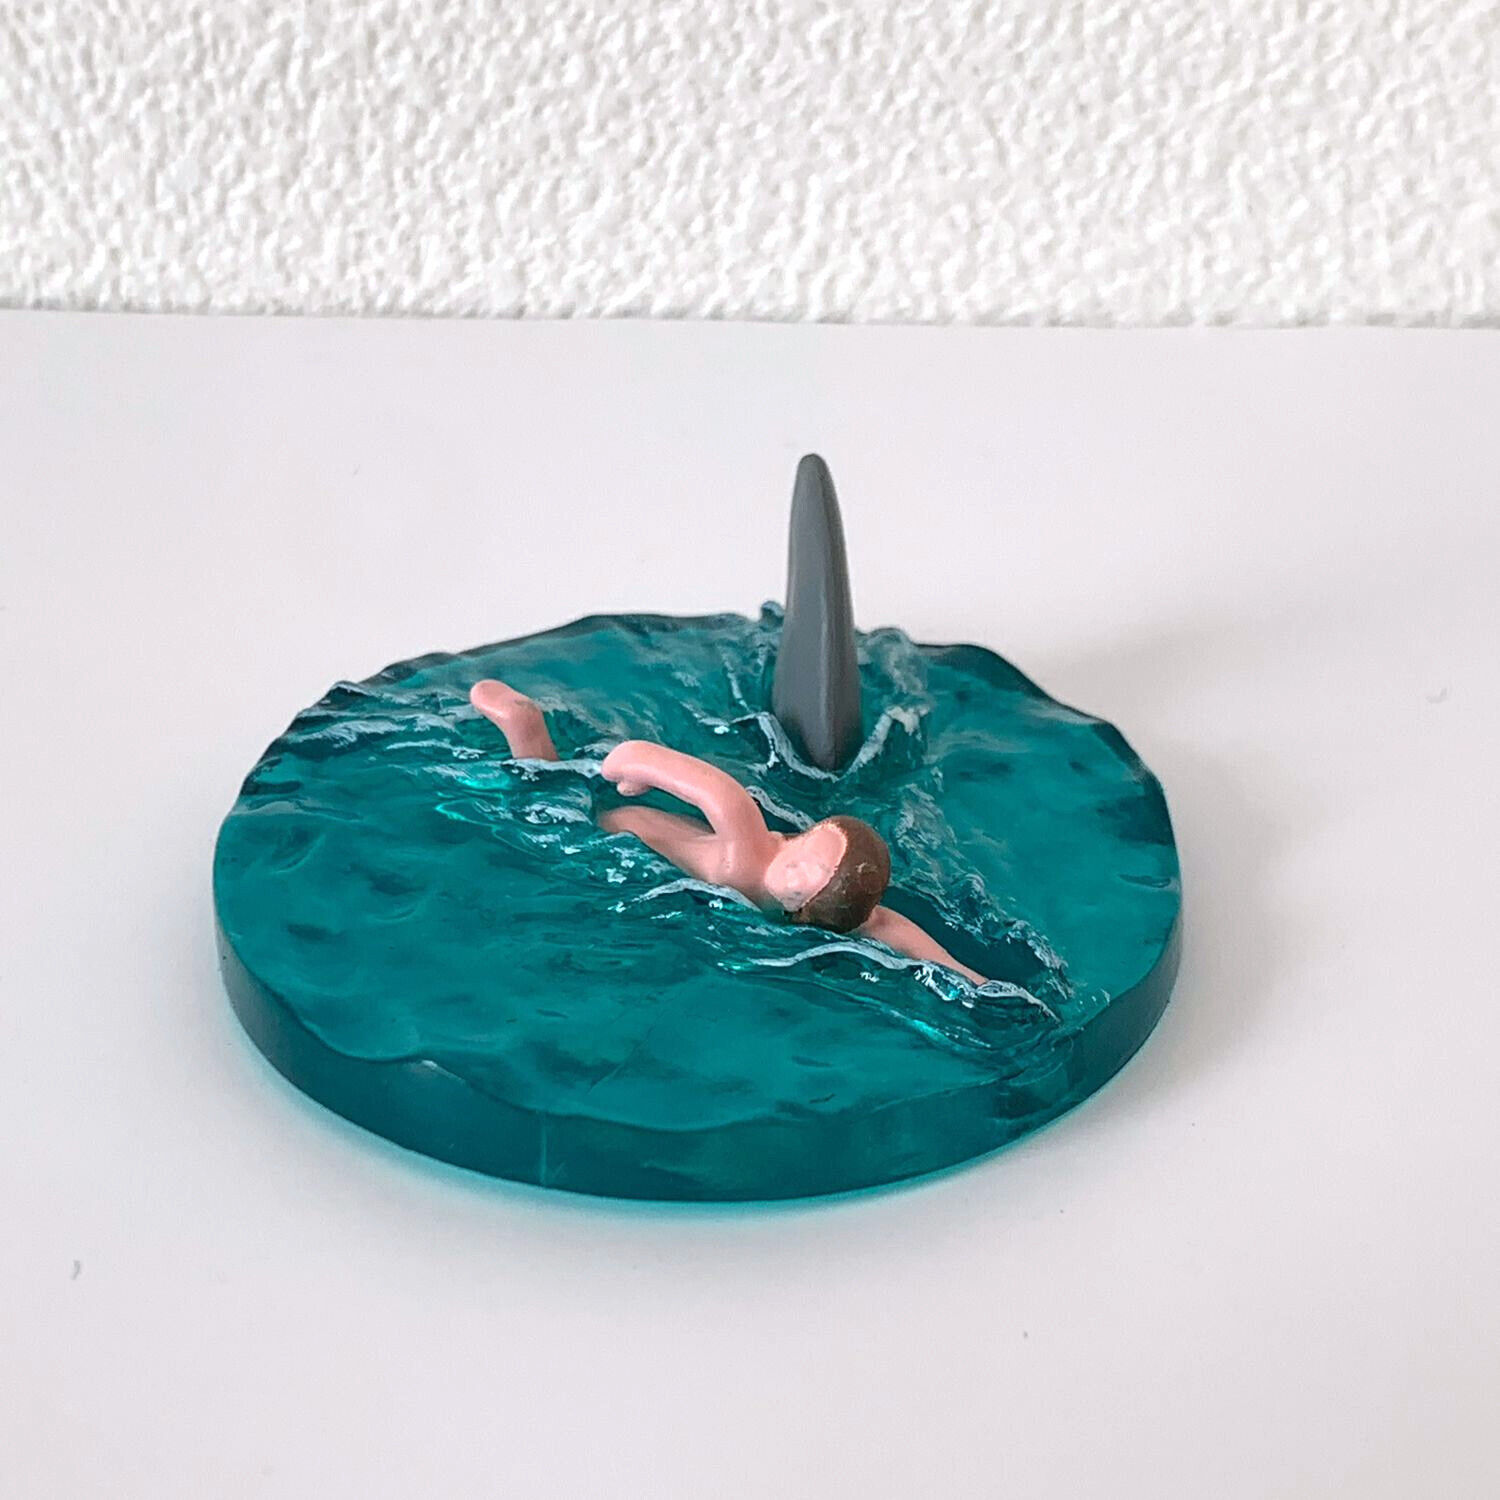 JAWS The beginning of Fear Top Diorama Figure Collection Vol.1 Movie Takara Tomy